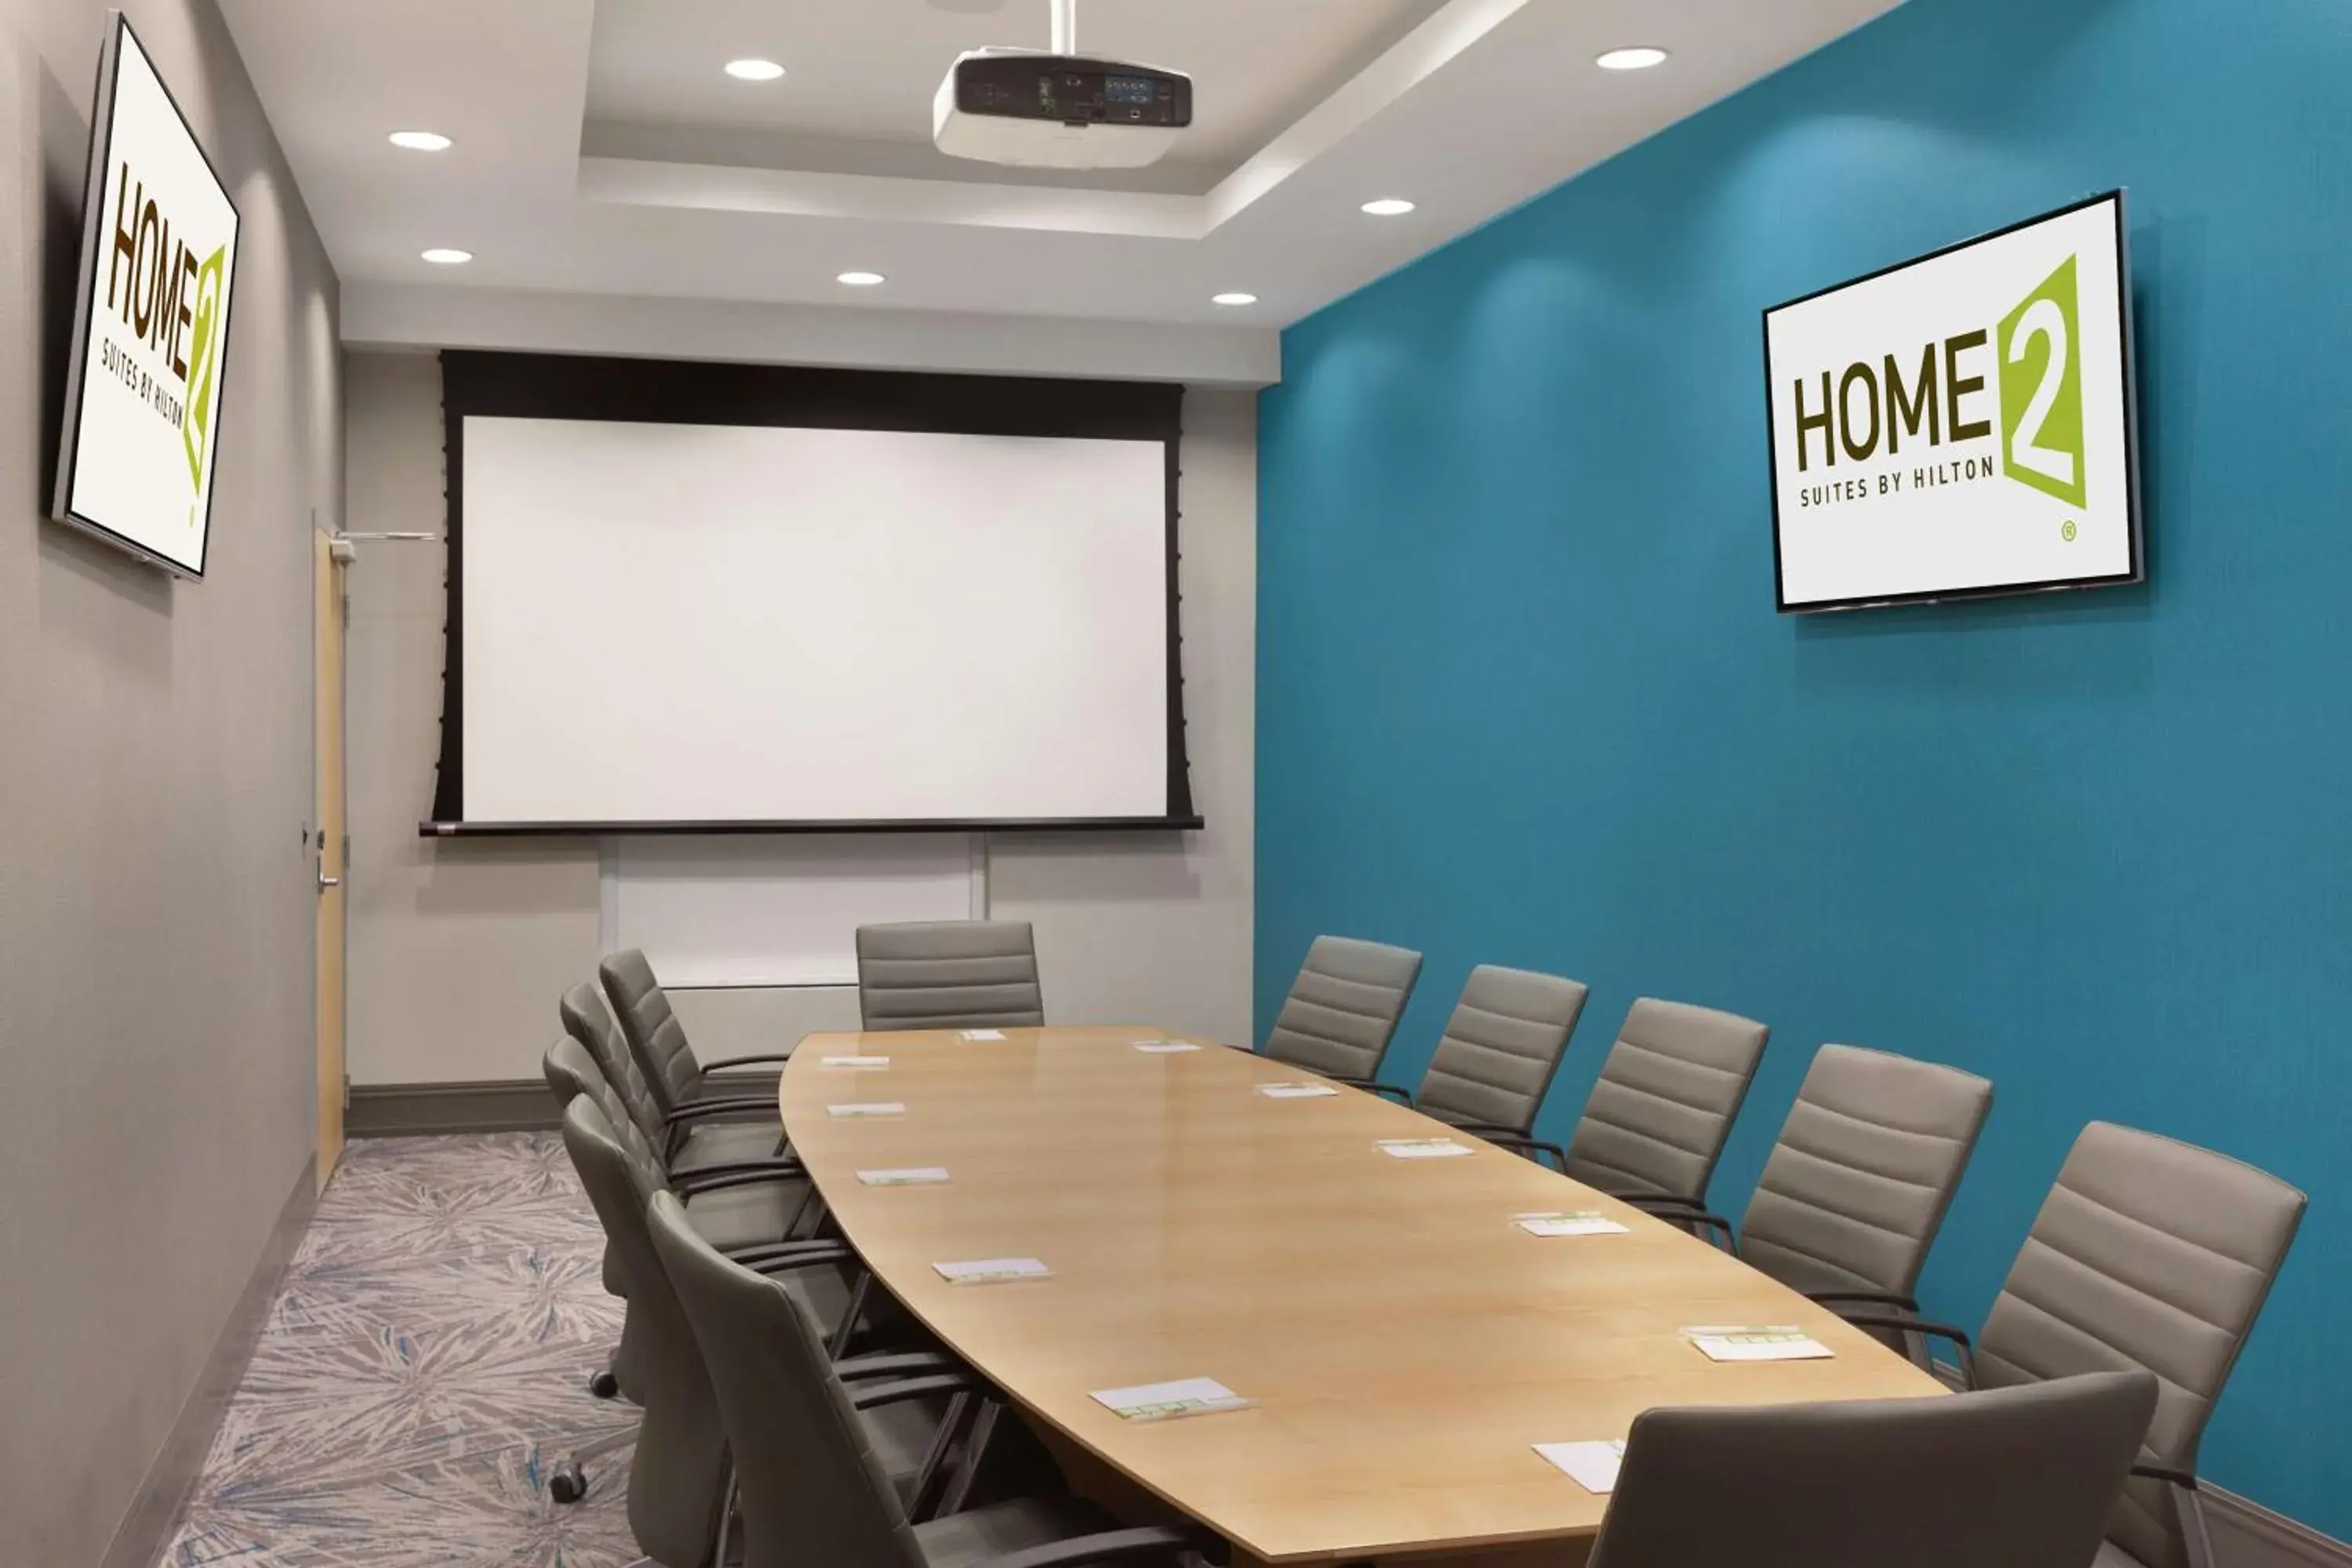 Meeting/conference room in Home2 Suites by Hilton Austin North/Near the Domain, TX